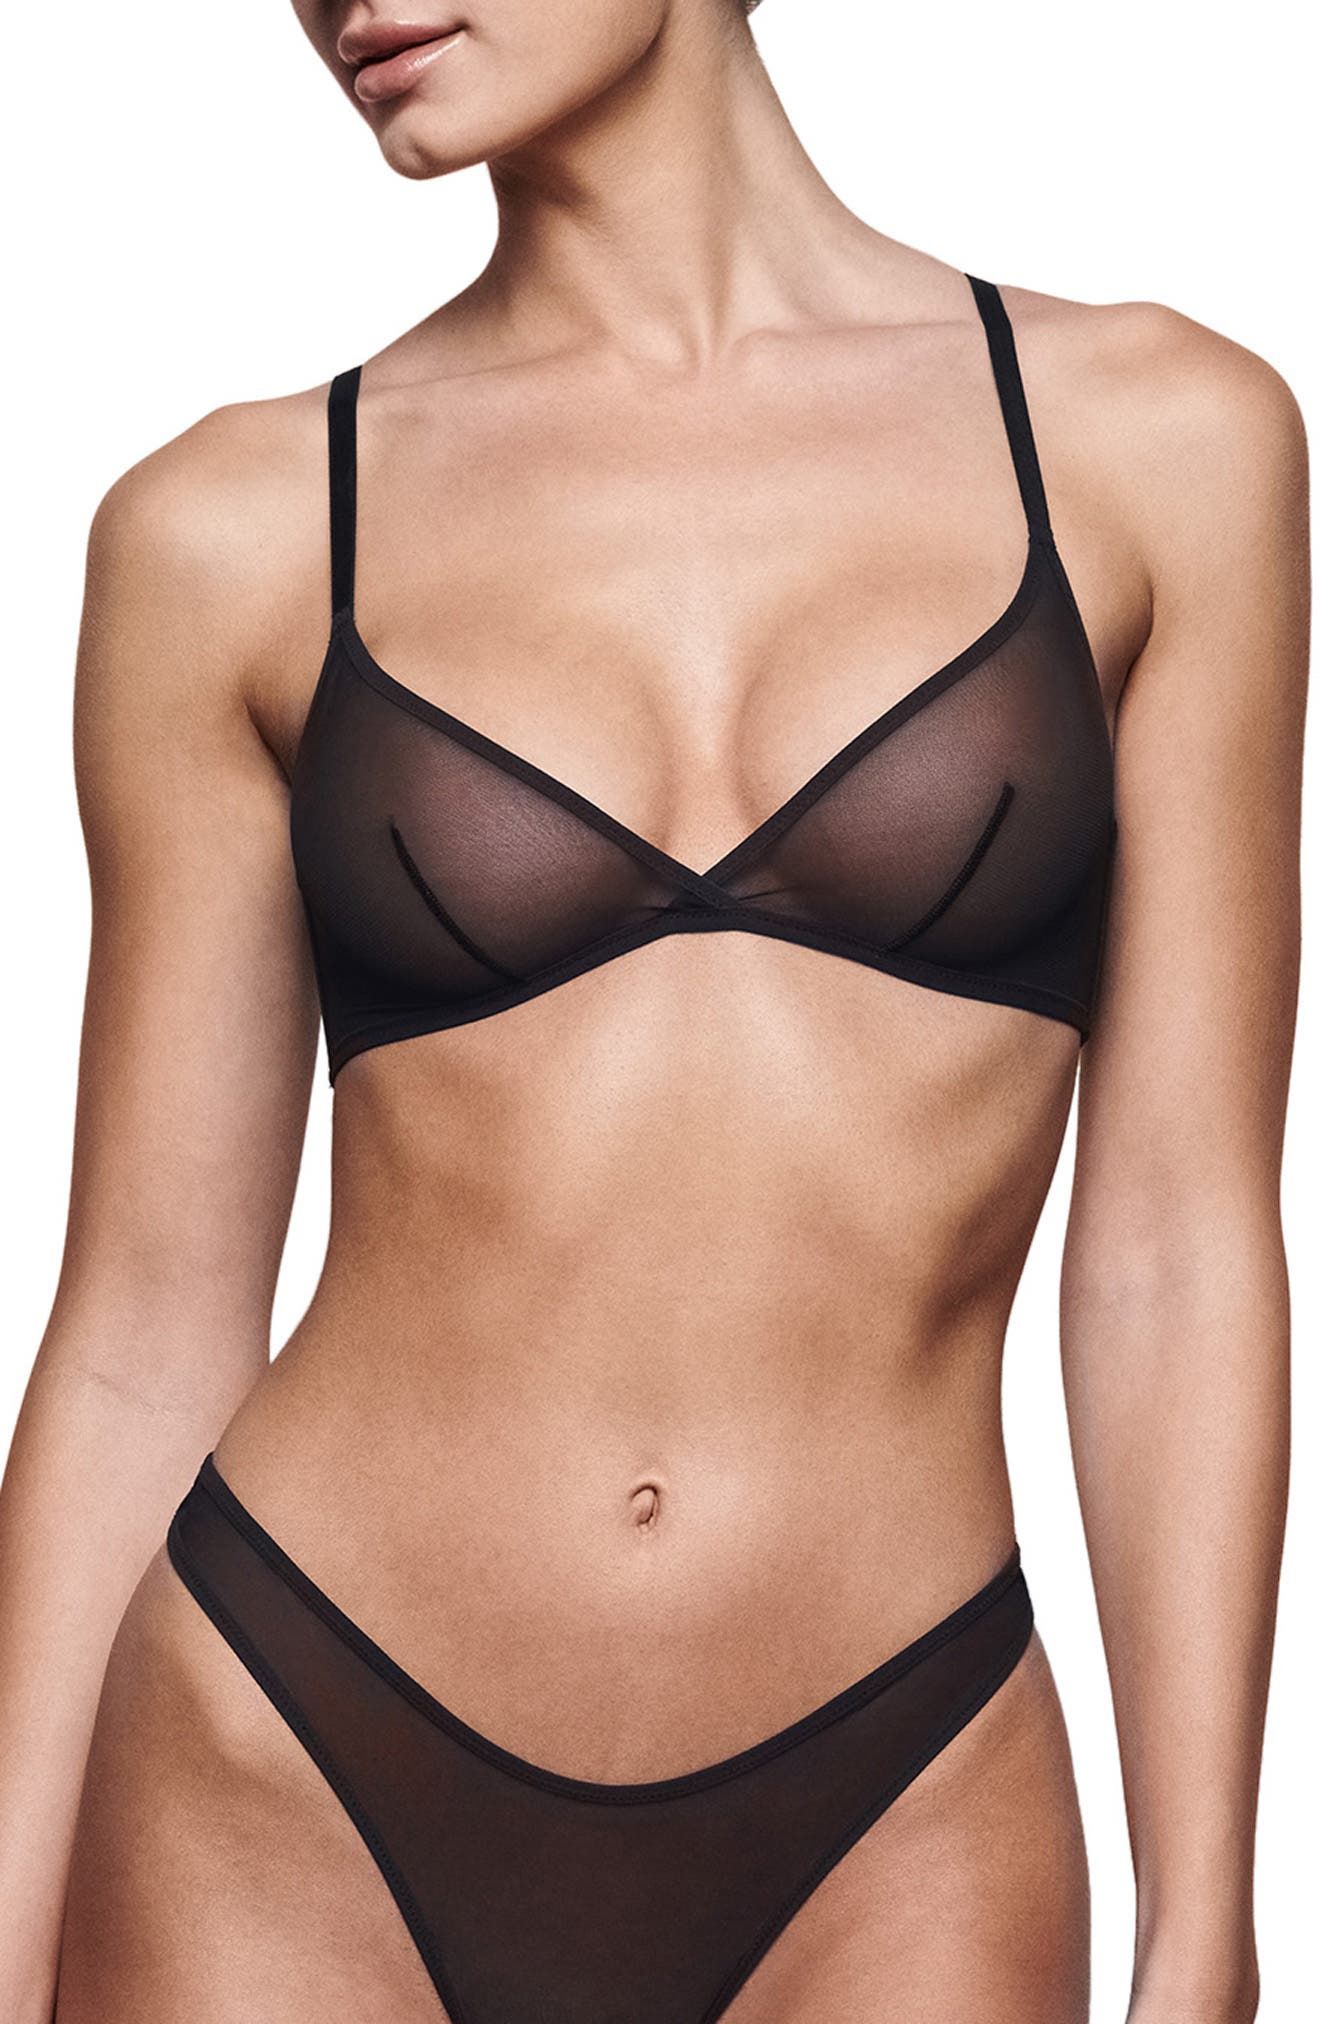 Designer wear with comfort that gives
perfect look: Triangle Bra